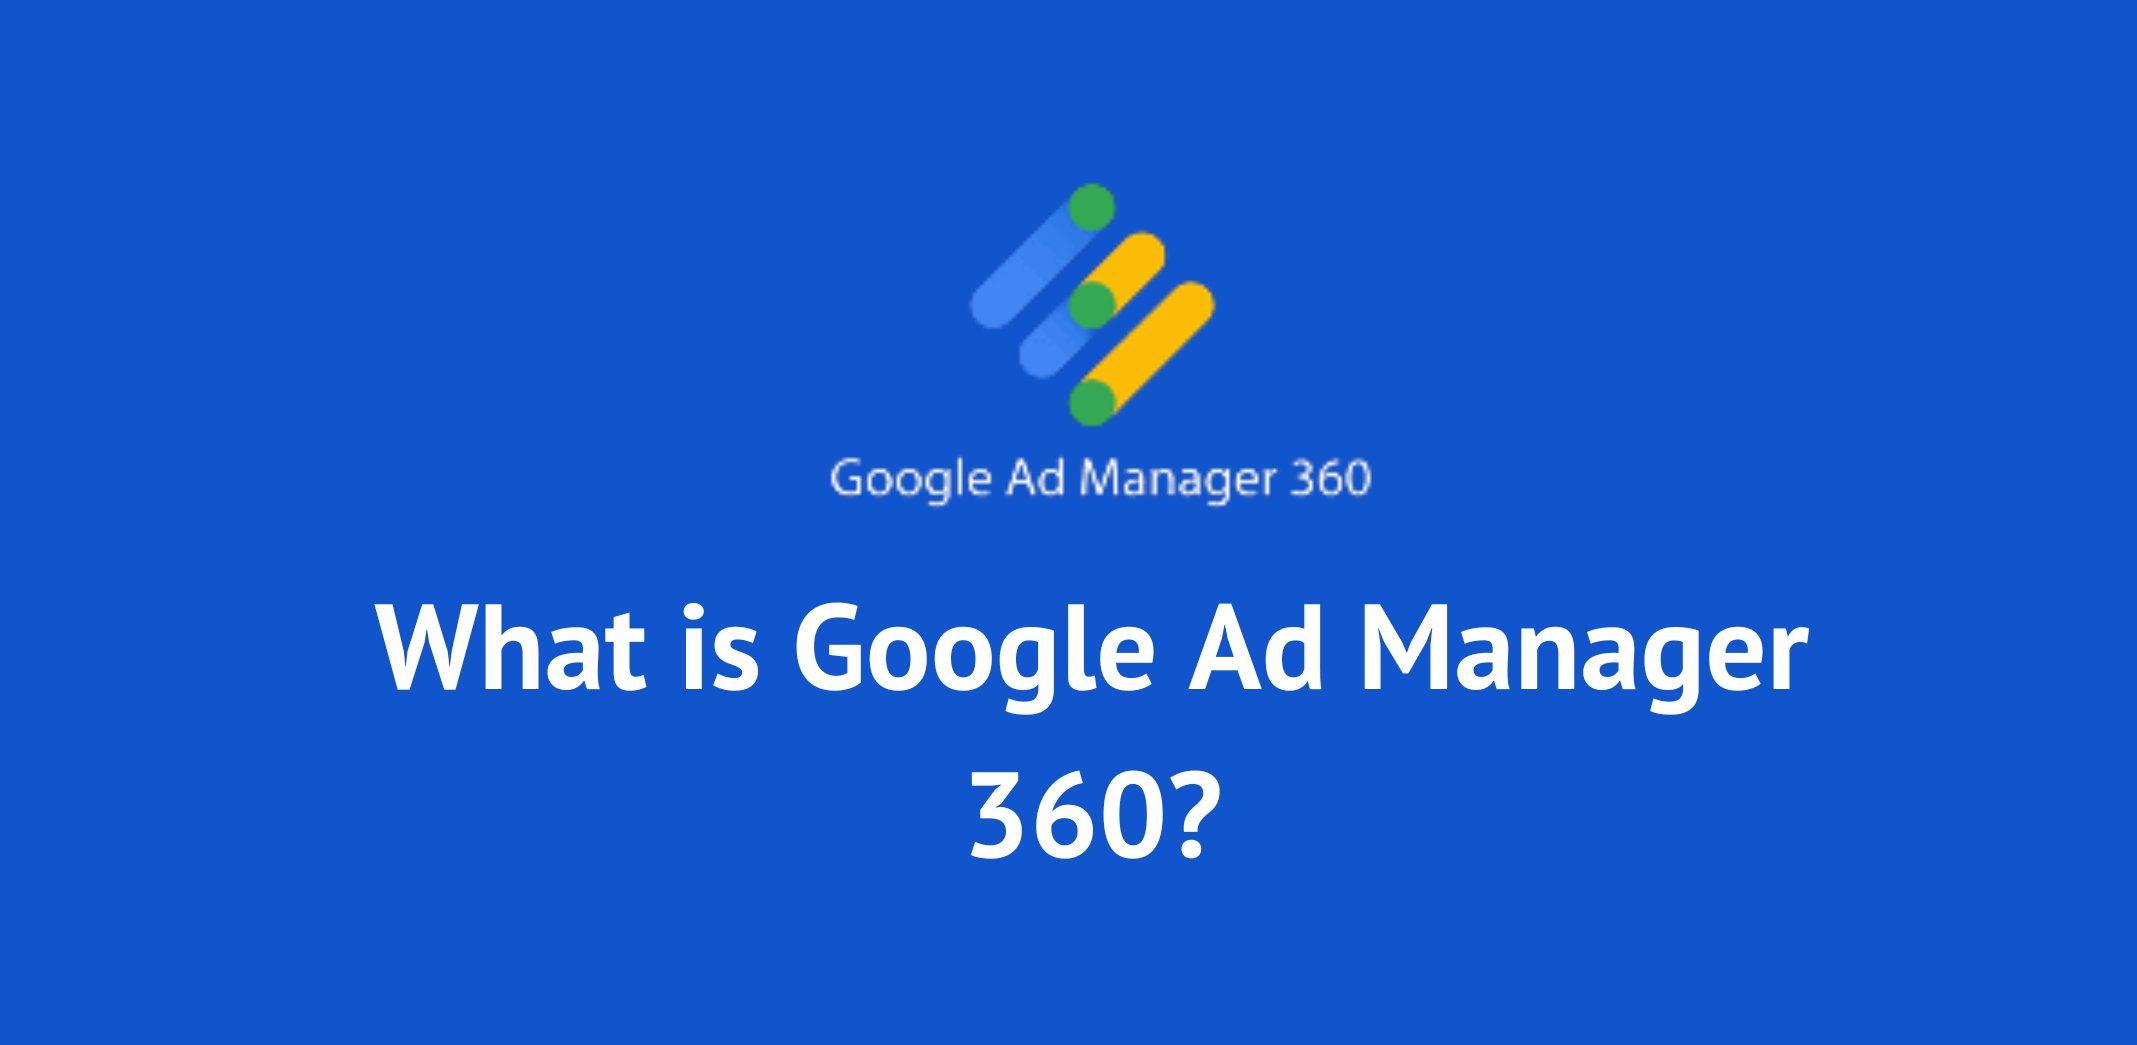 What is Google Ad Manager 360?